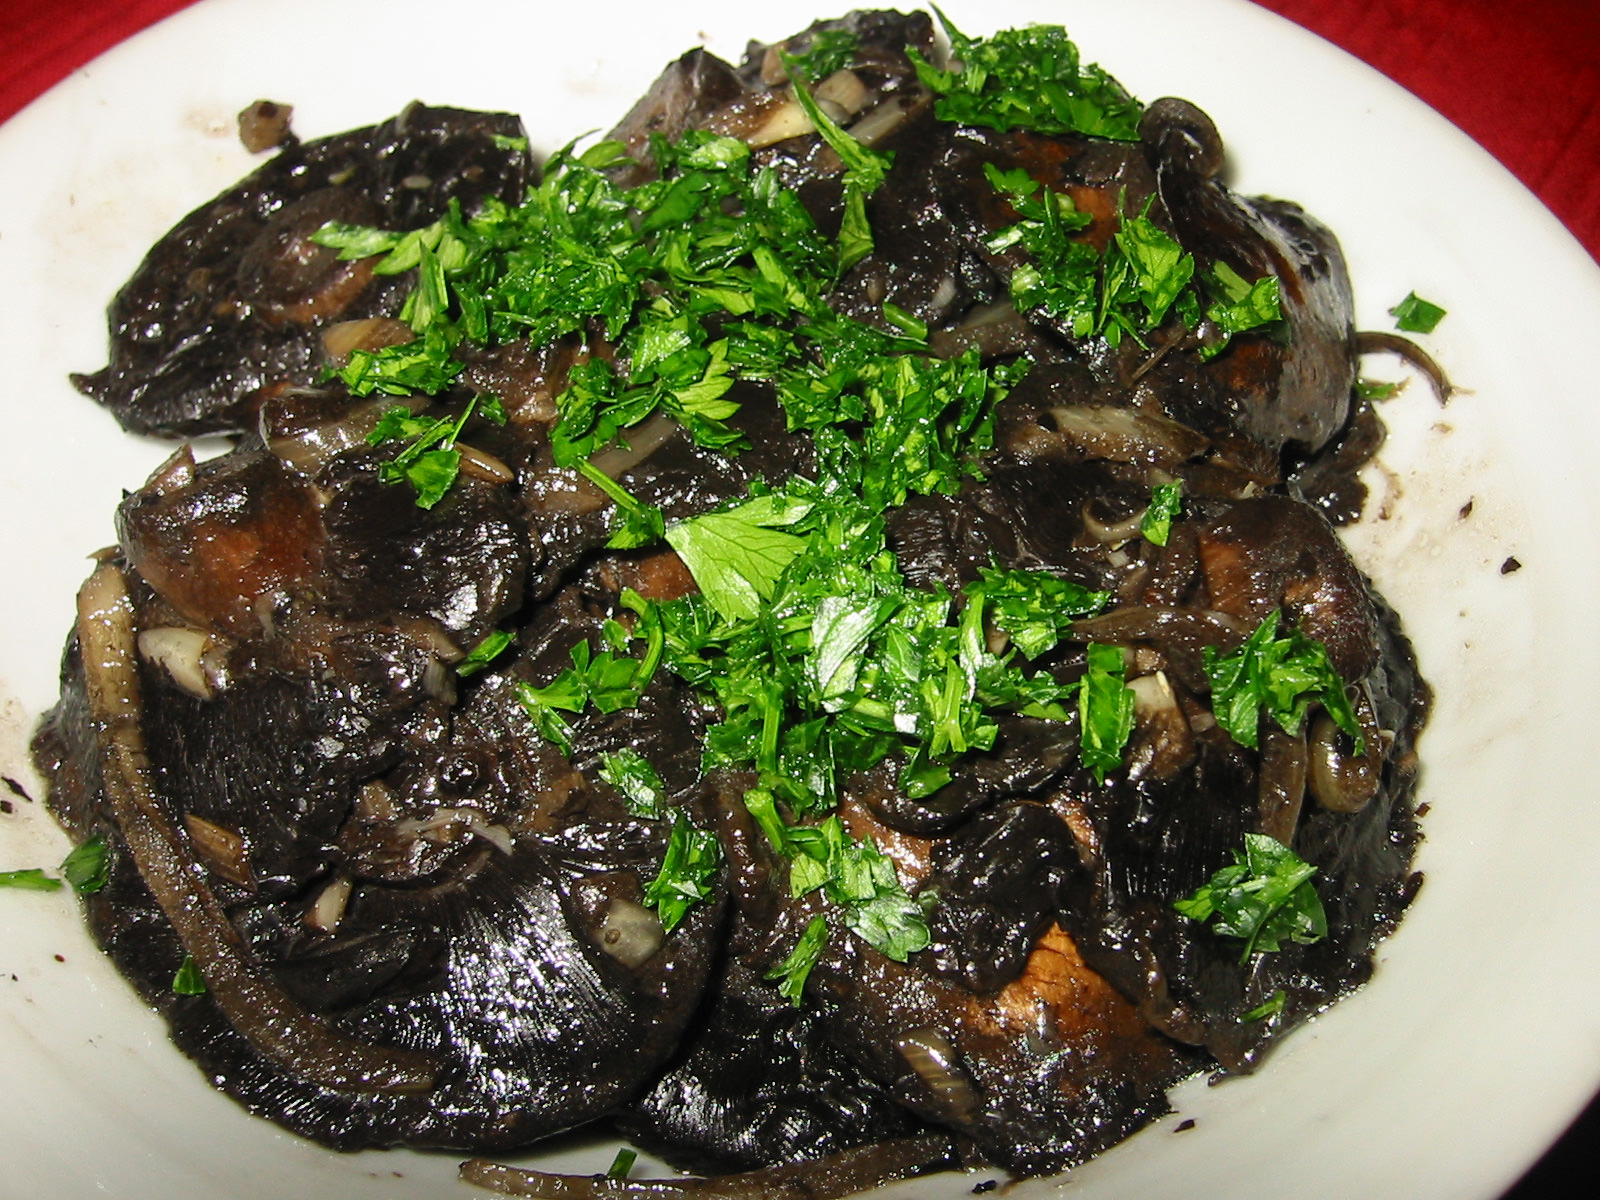 Grilled garlic and onion mushrooms topped with fresh parsley